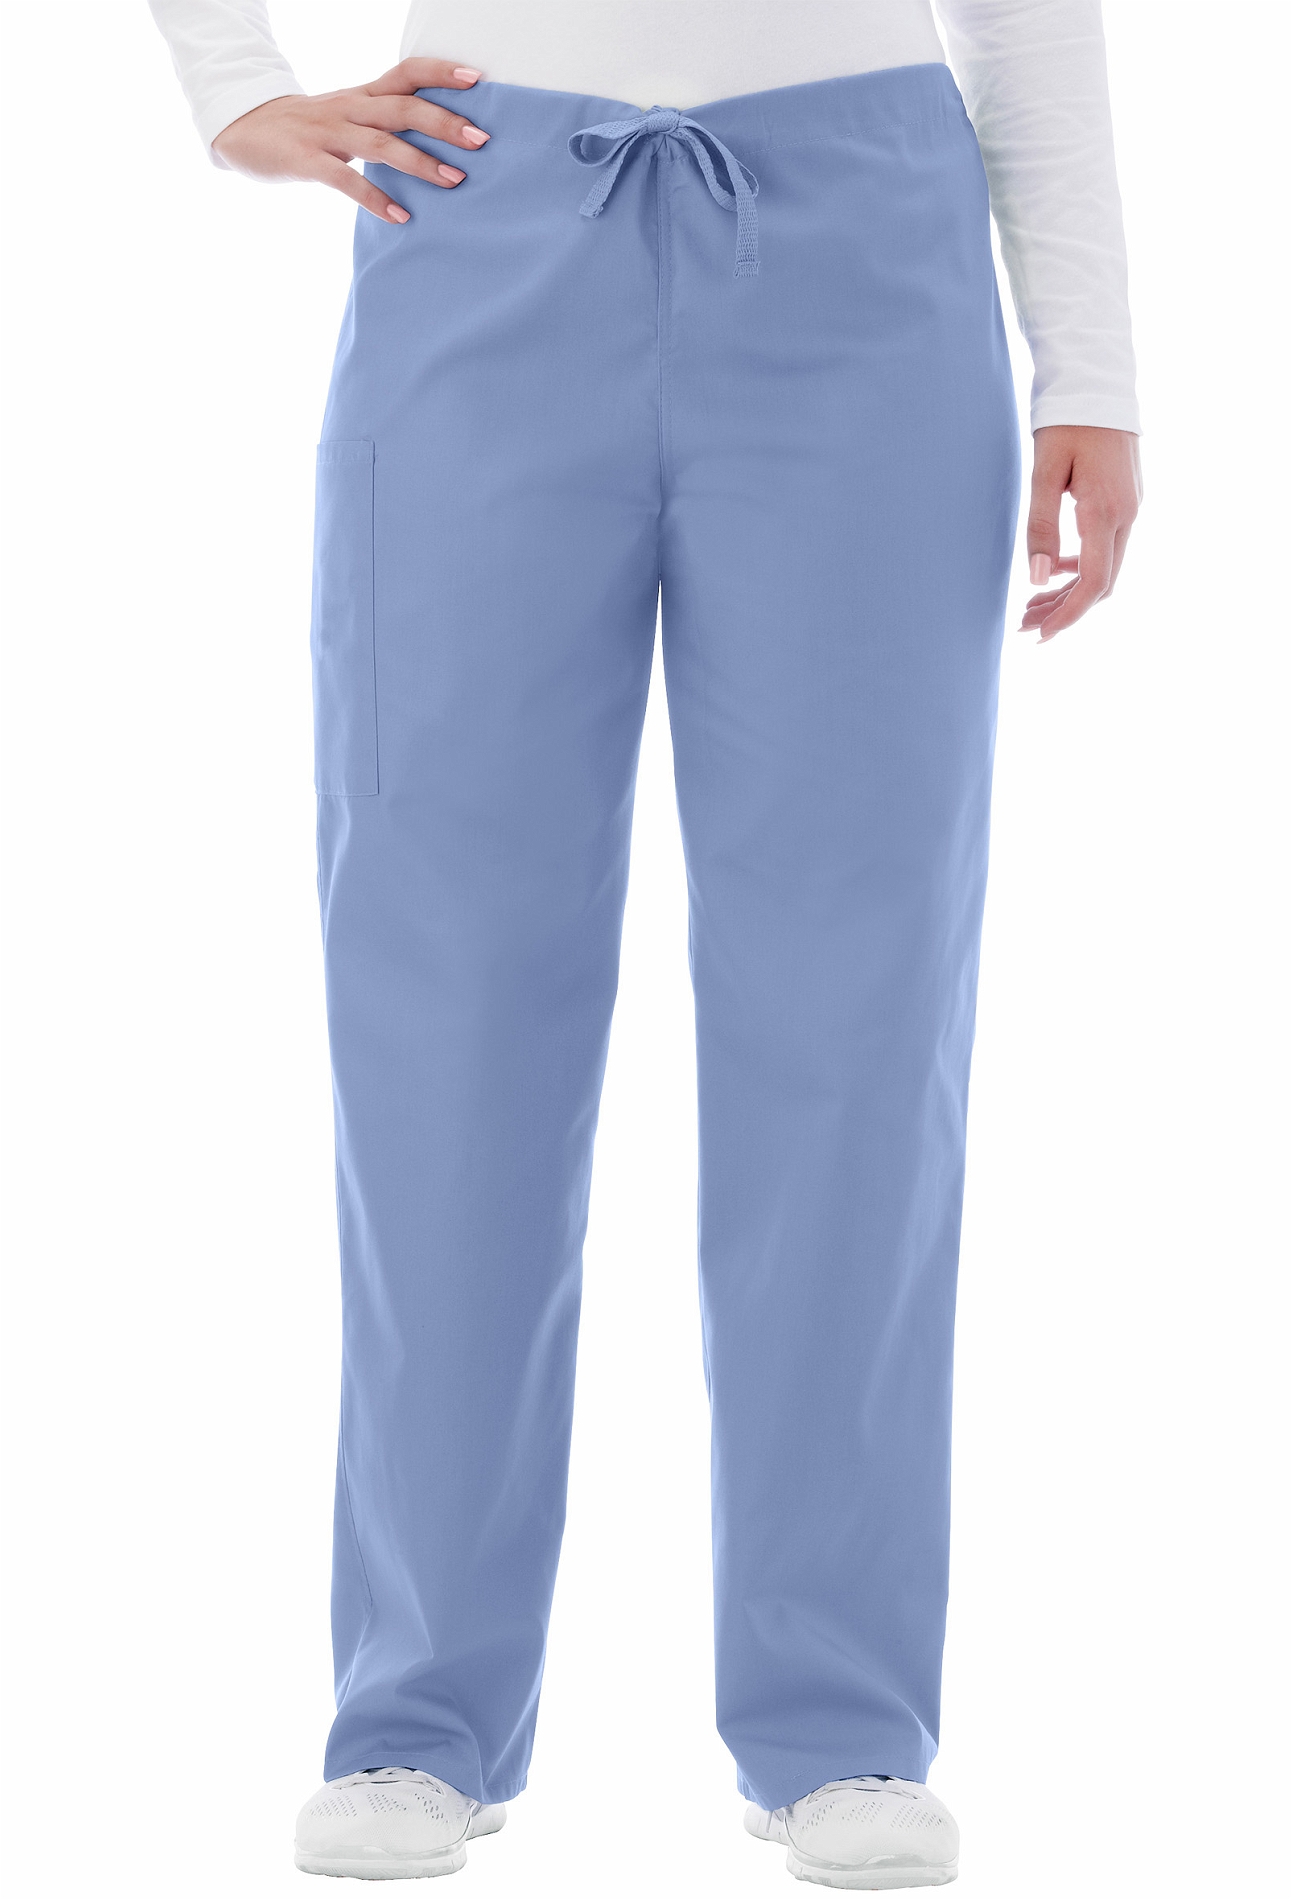 https://medicalscrubscollection.com/content/images/thumbs/0734328_fundamentals-unisex-drawstring-pant-14920.jpeg